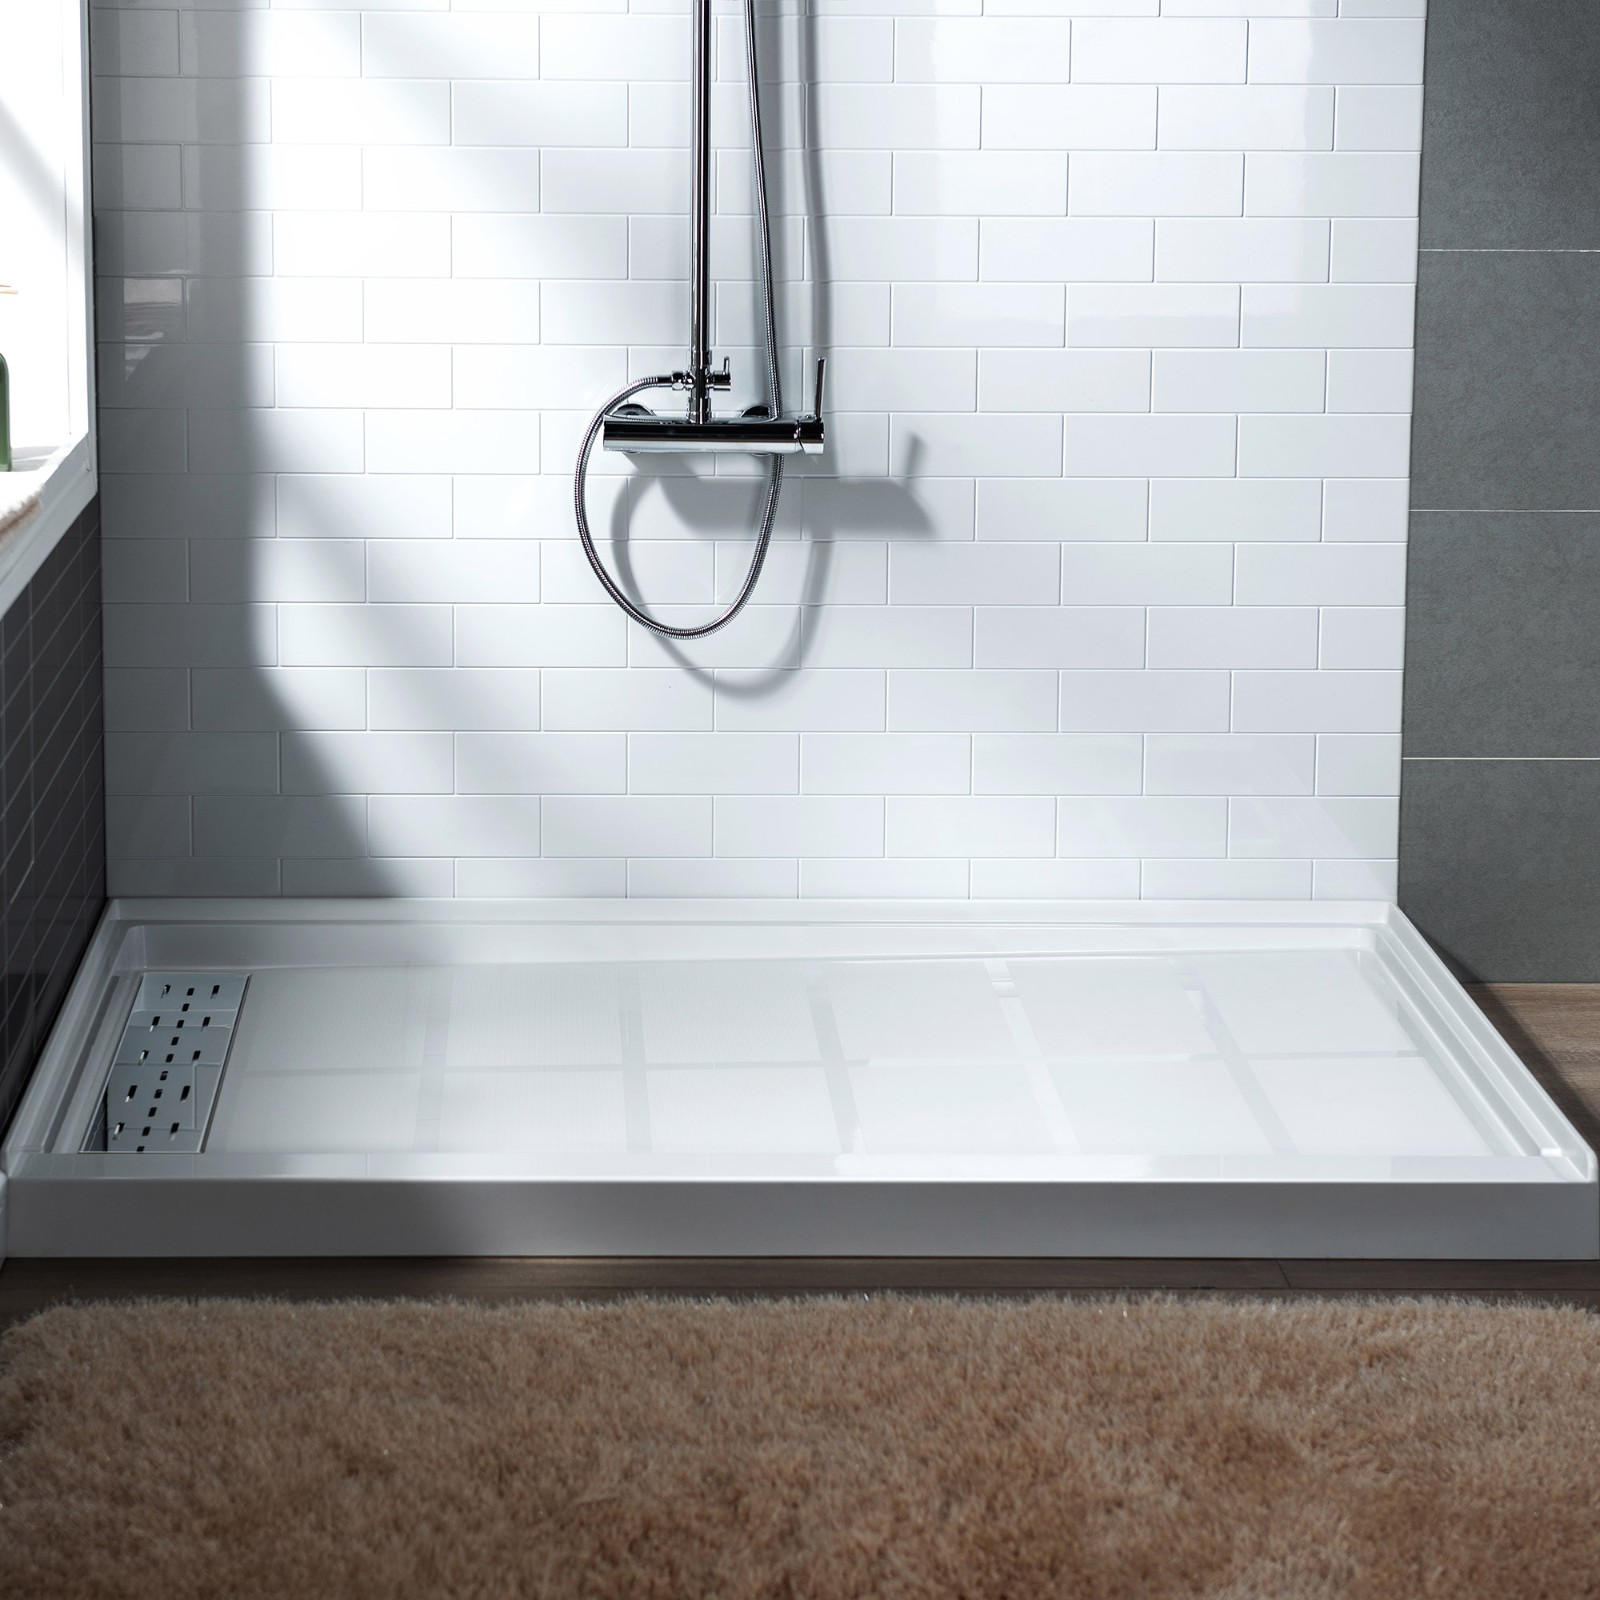  WOODBRIDGE SBR6030-1000L-CH SolidSurface Shower Base with Recessed Trench Side Including  Chrome Linear Cover, 60